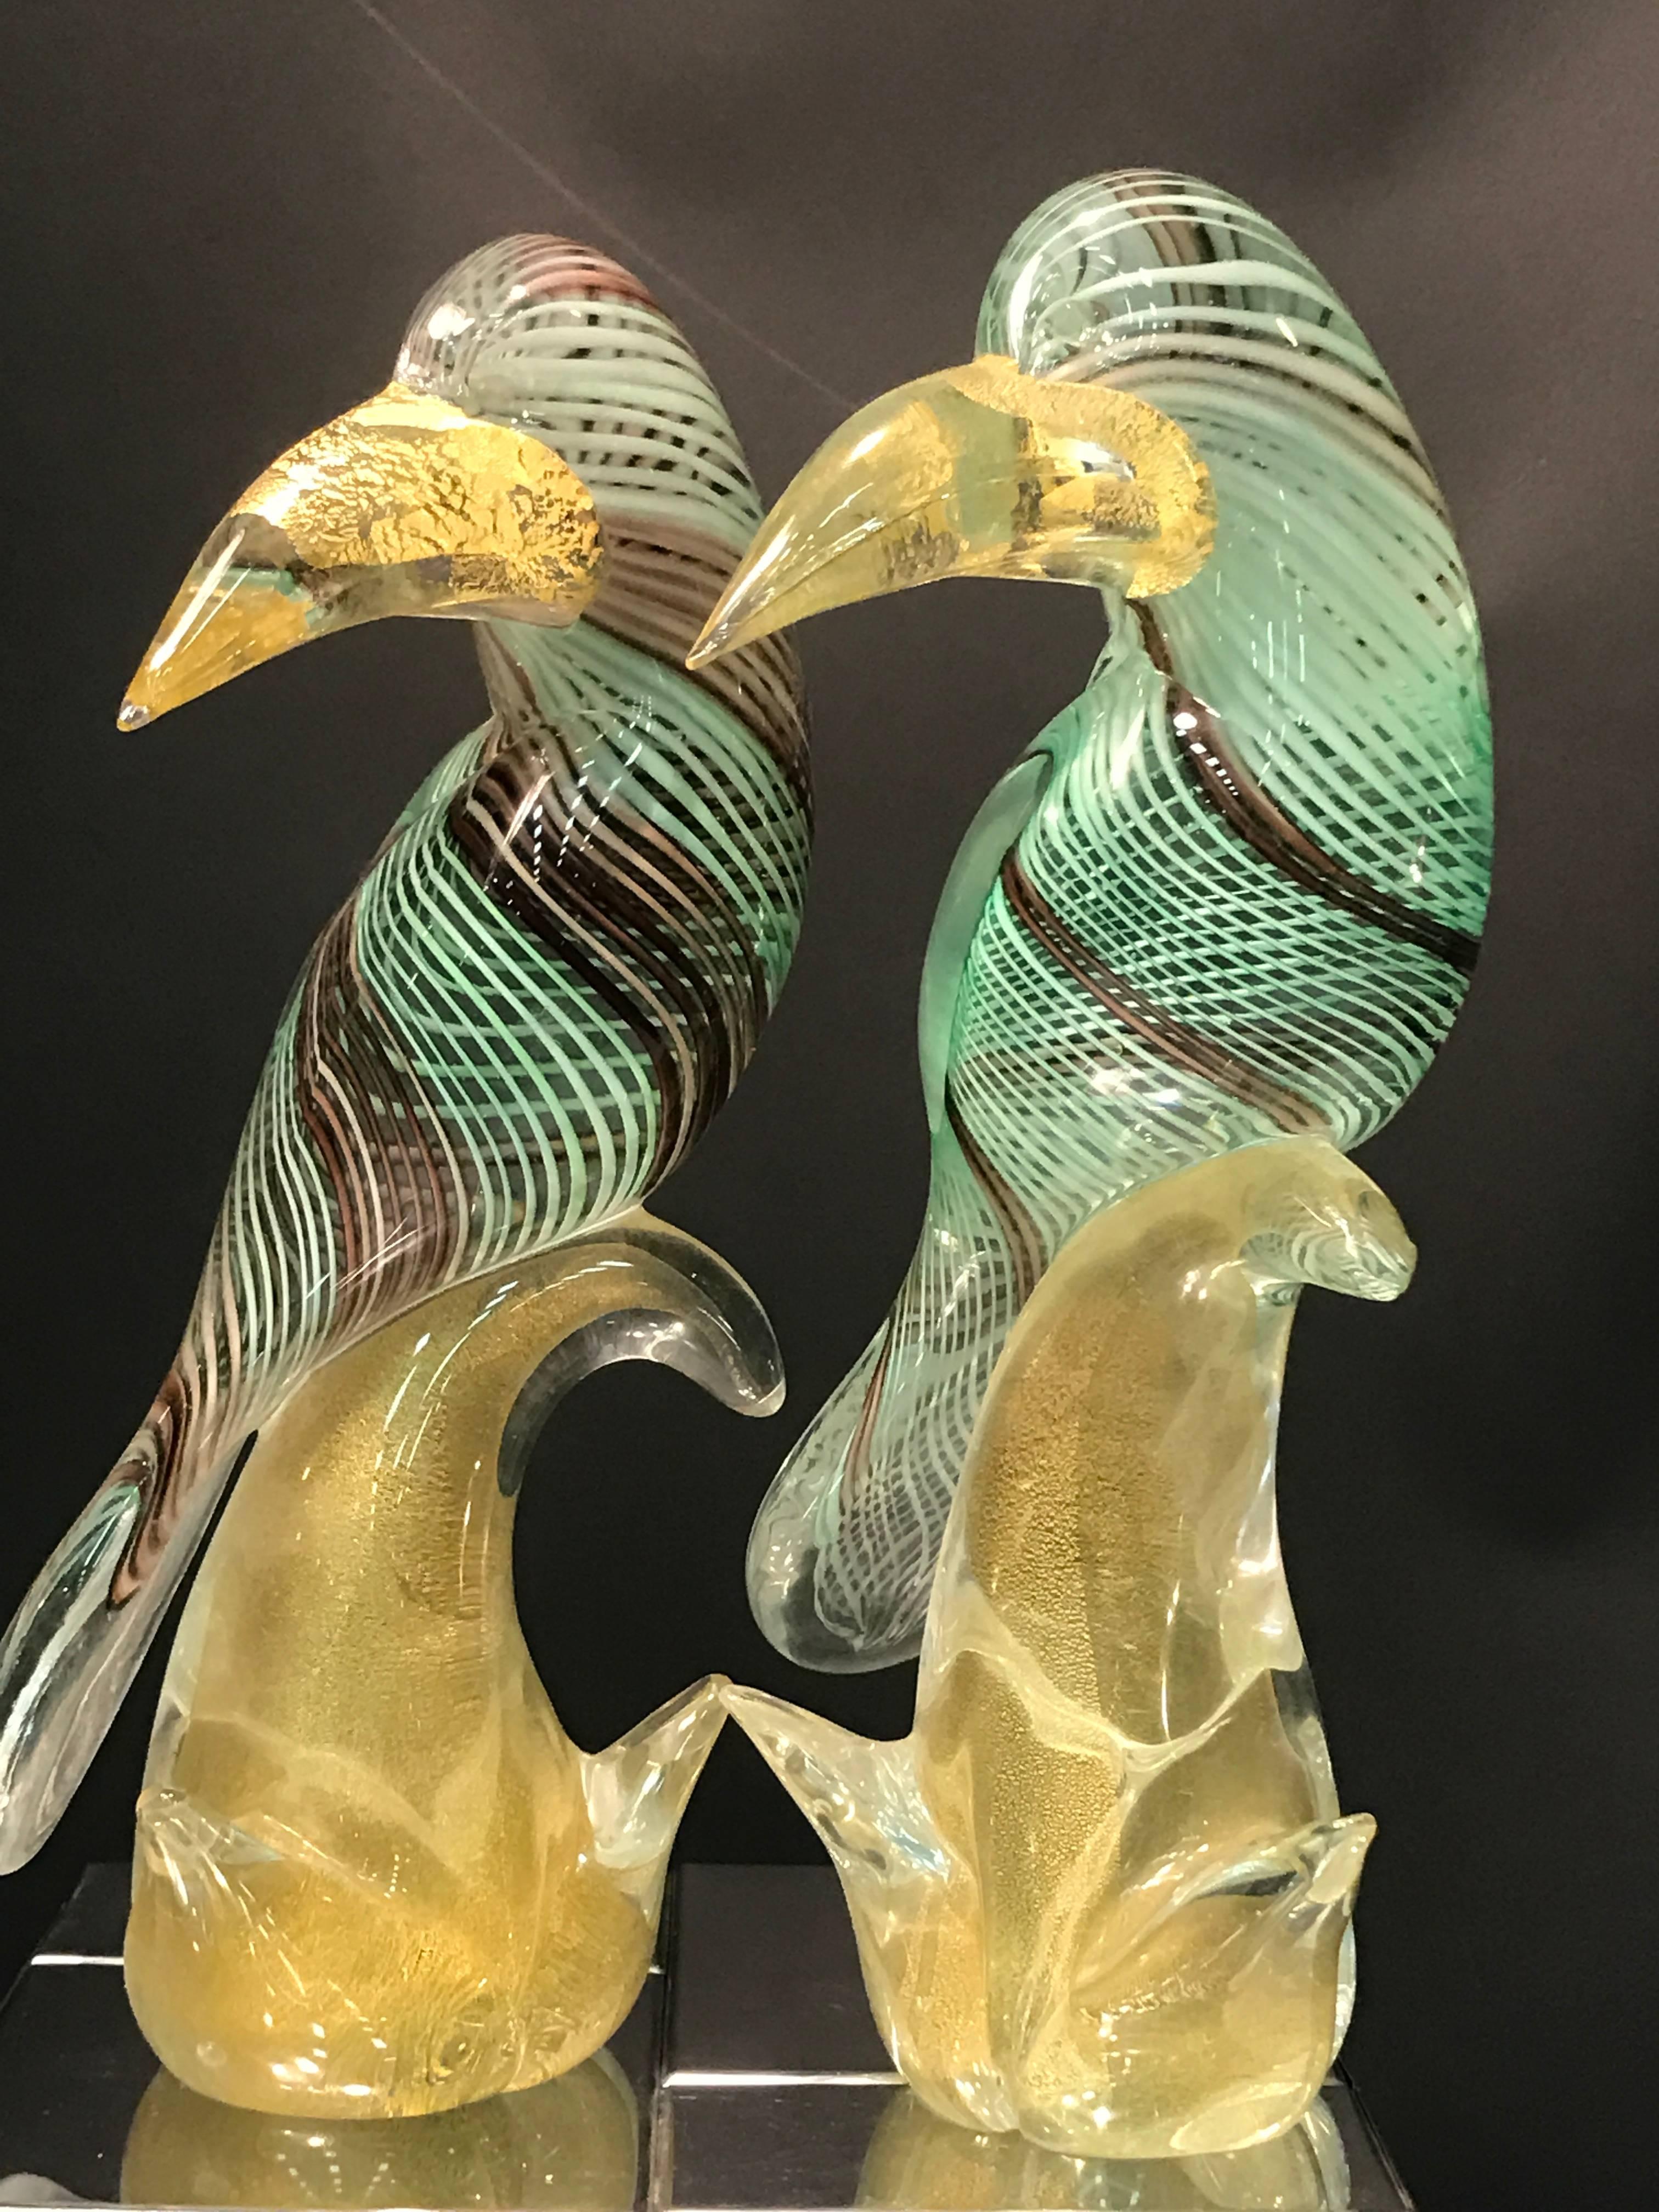 A stunning pair of Archimede Seguso Murano glass green toucans or birds with gold fleck beaks and perches, circa 1960. Great condition.